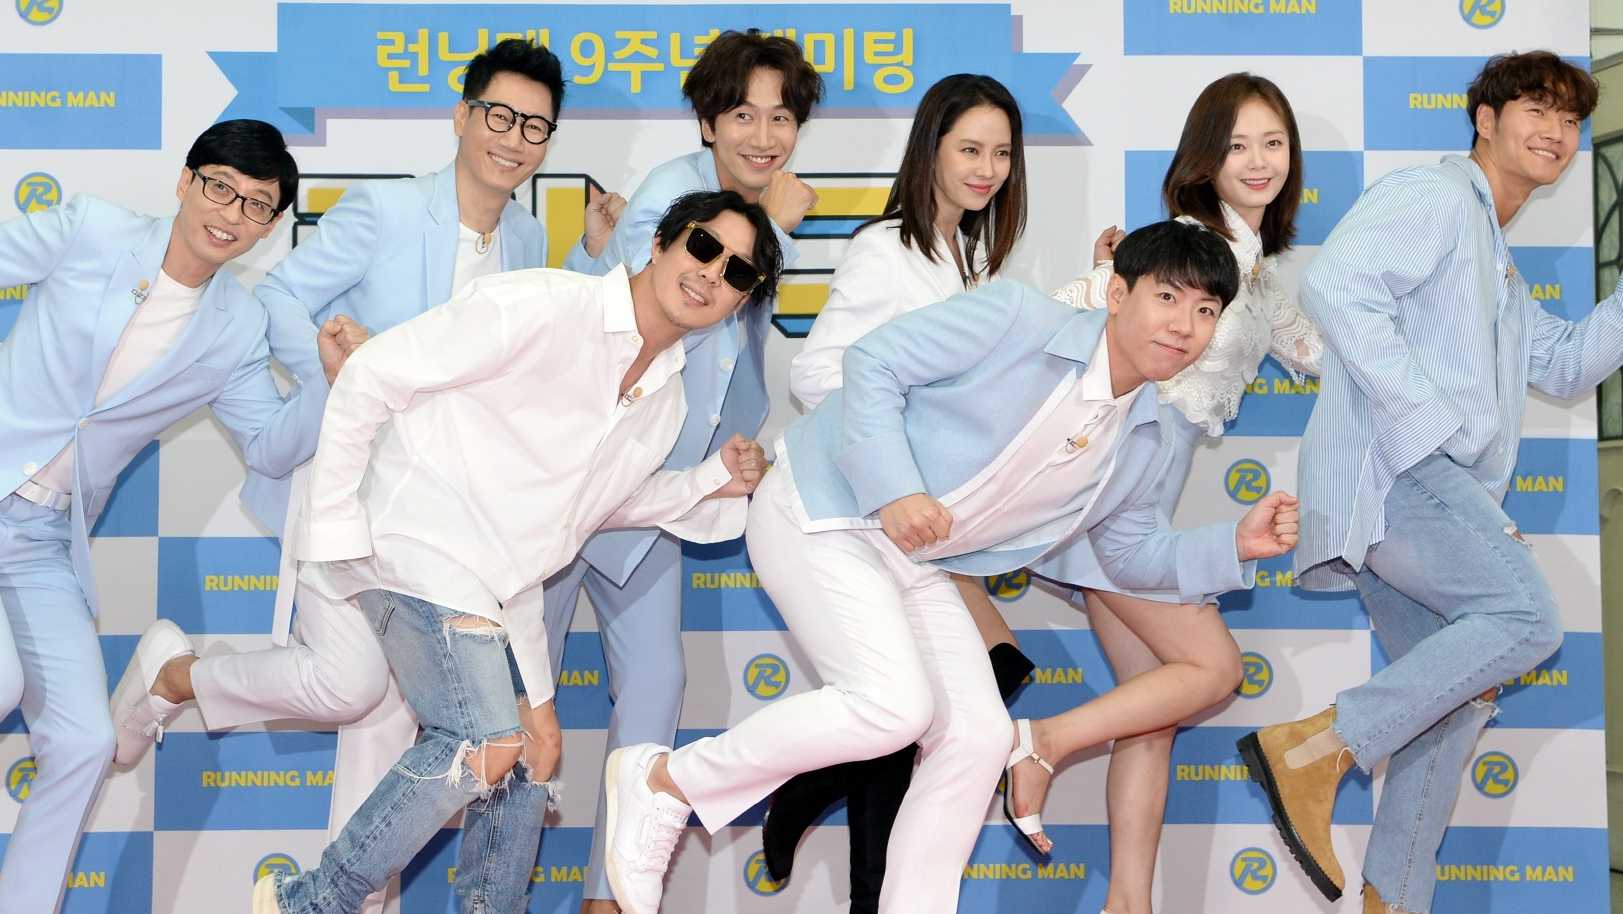 List running man 2021 guest Here Are